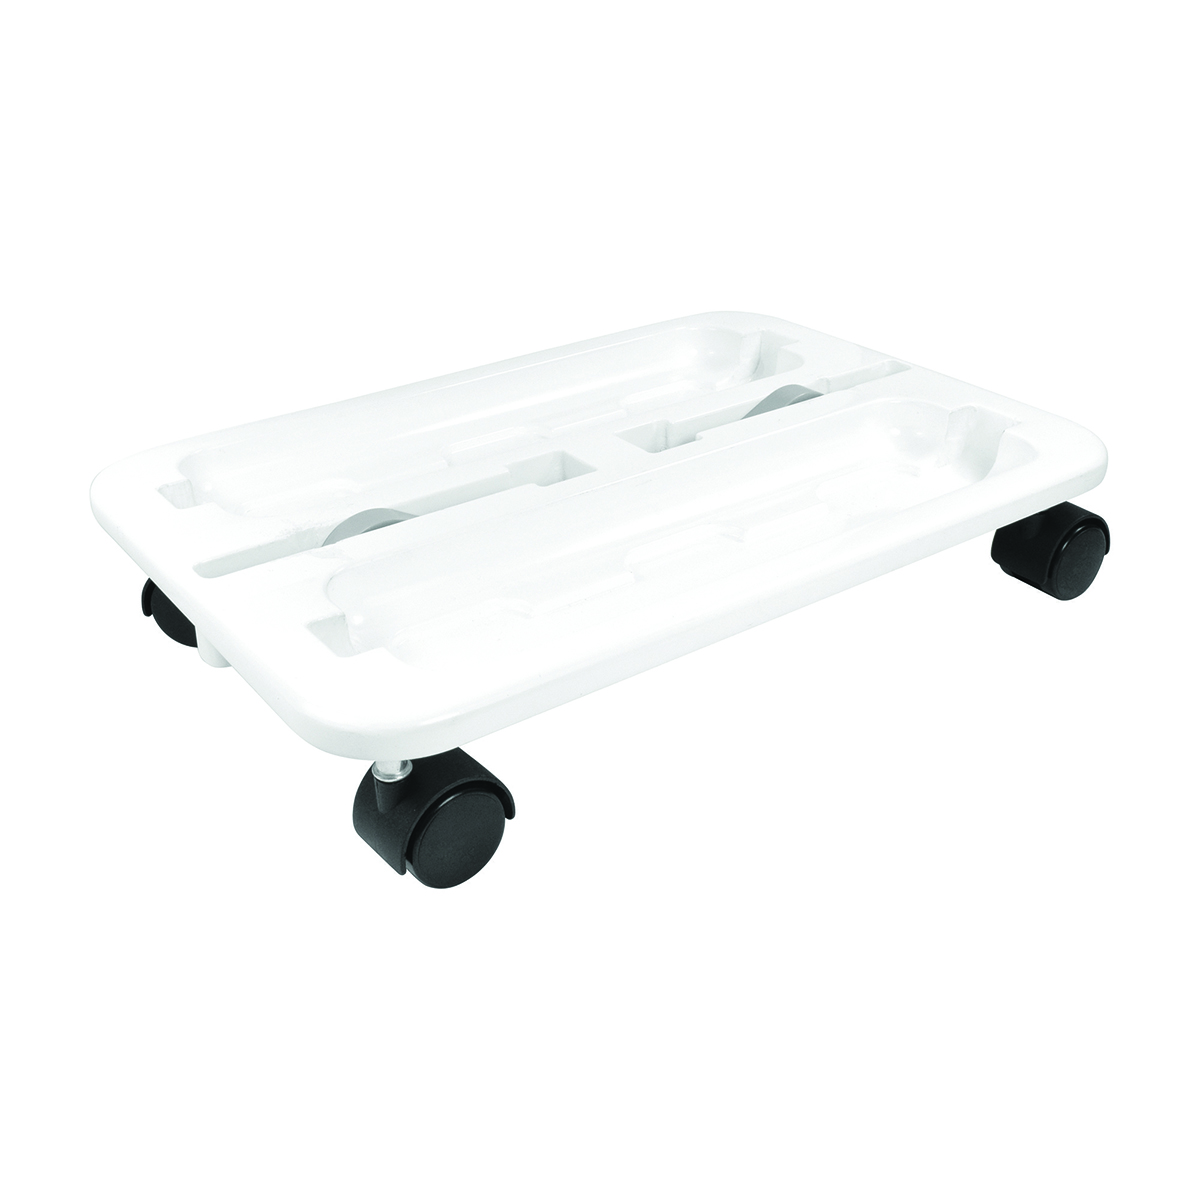 https://www.containerstore.com/catalogimages/392471/10080740-Deflecto-Caddy-Organizer-Wh.jpg